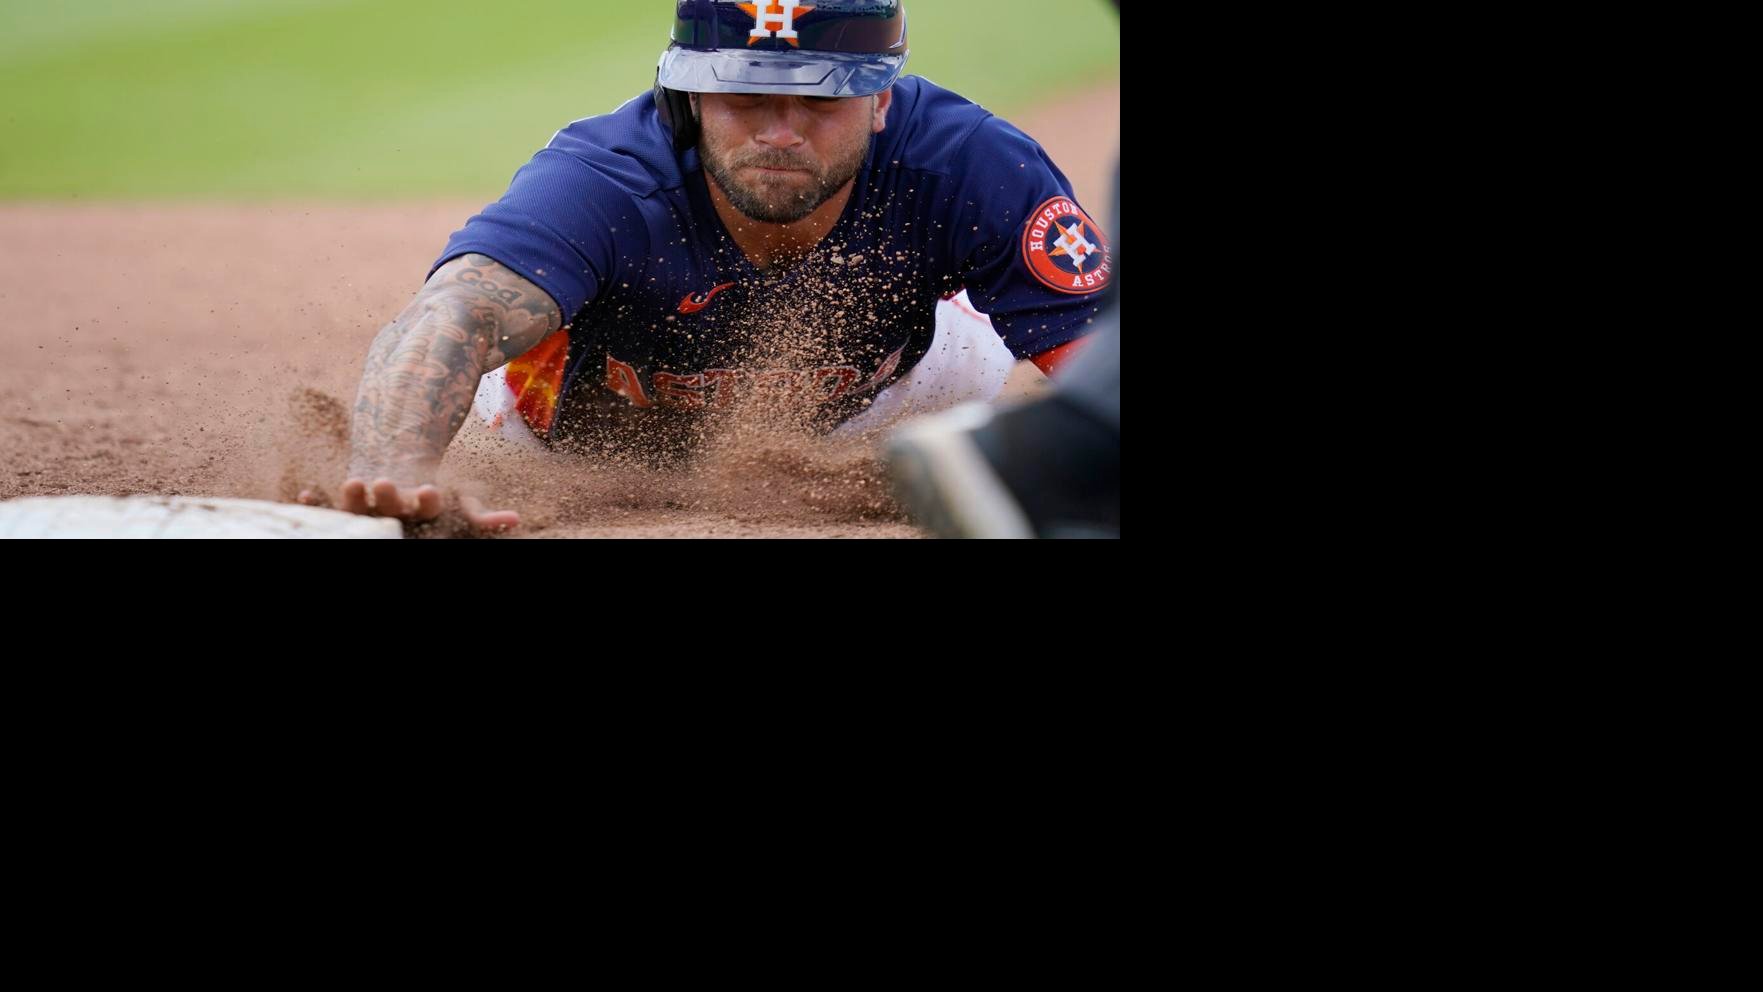 This is a 2021 photo of Taylor Jones of the Houston Astros baseball team.  This image reflects the Houston Astros active roster as of Thursday, Feb.  25, 2021 when this image was